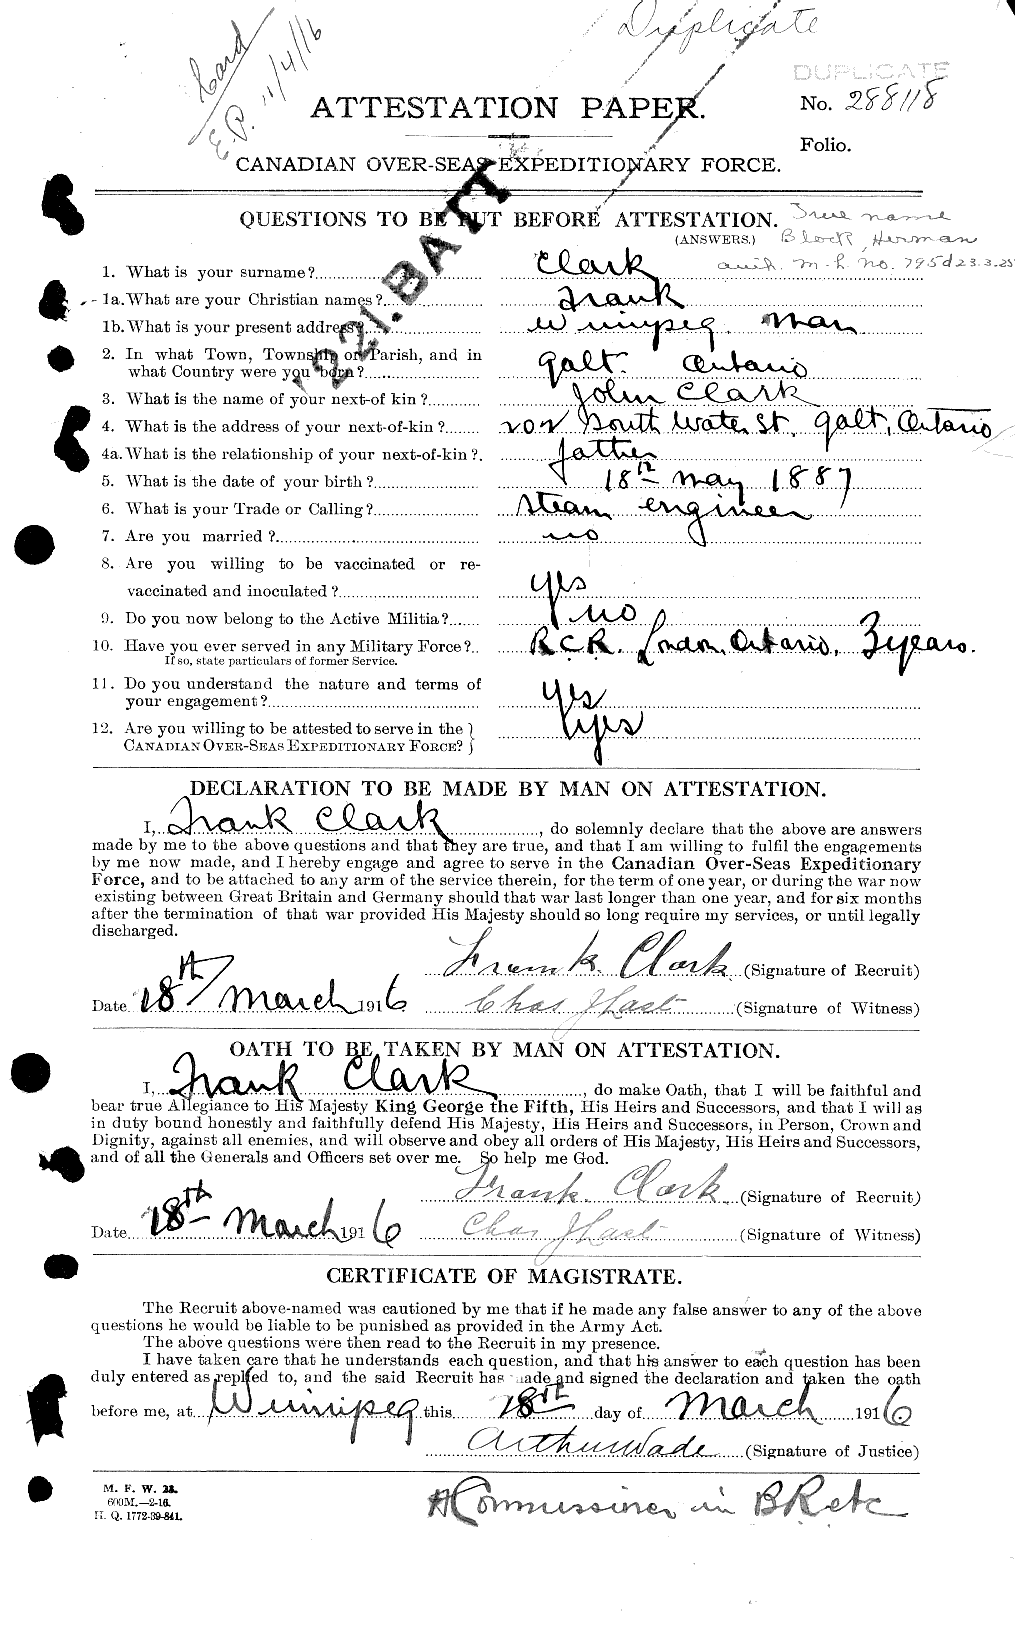 Personnel Records of the First World War - CEF 024288a